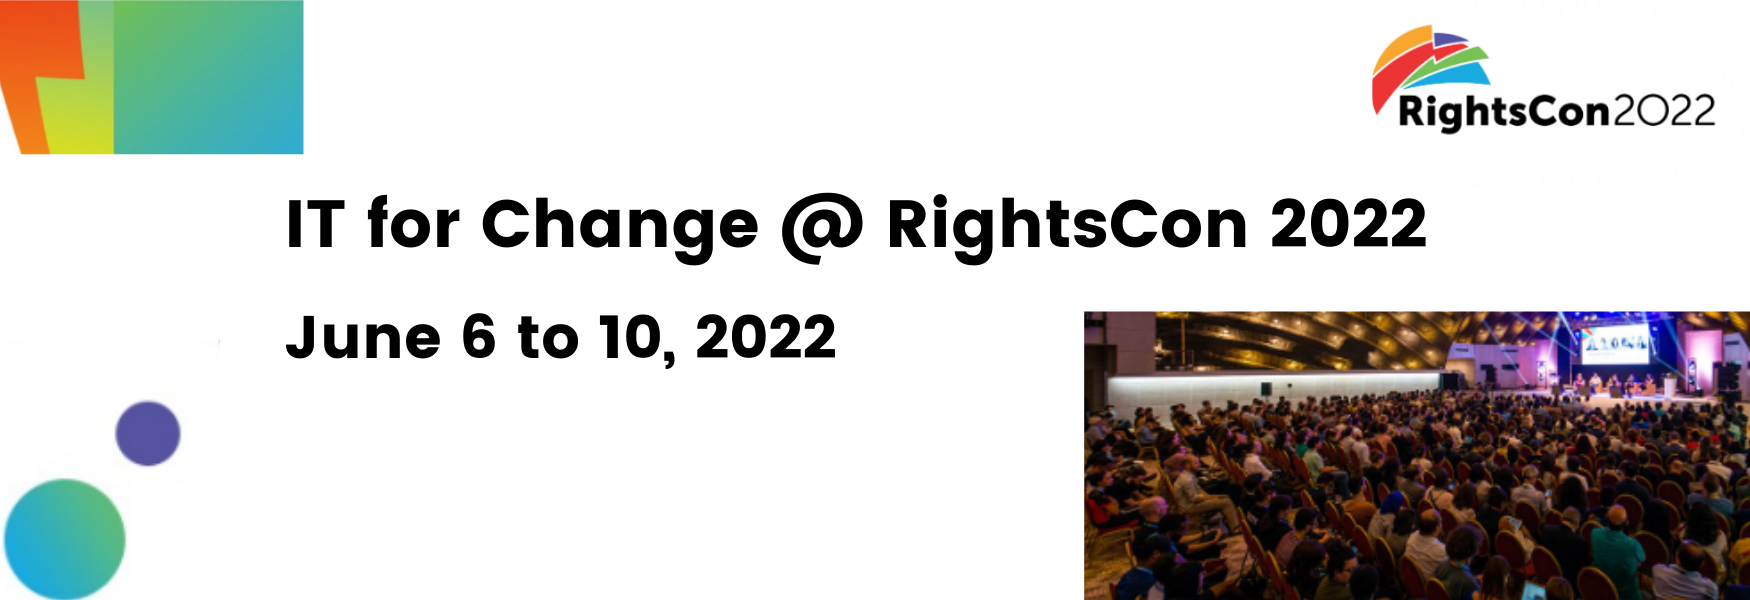 IT for Change at RightsCon 2022